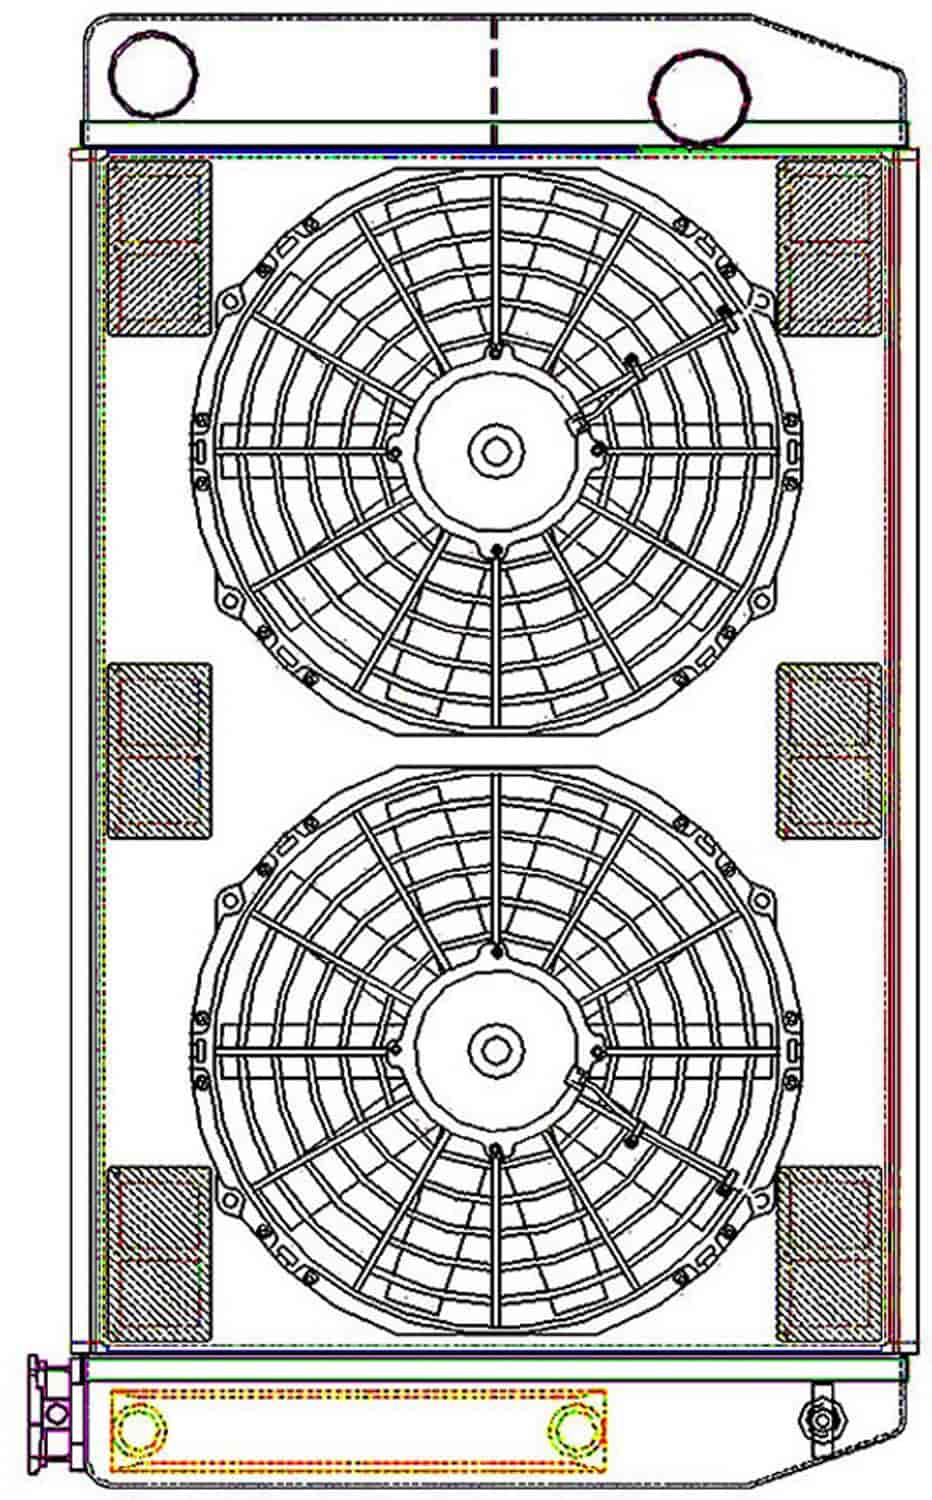 ClassicCool ComboUnit Universal Fit Radiator and Fan Dual Pass Crossflow Design 27.50" x 15.50" with Transmission Cooler